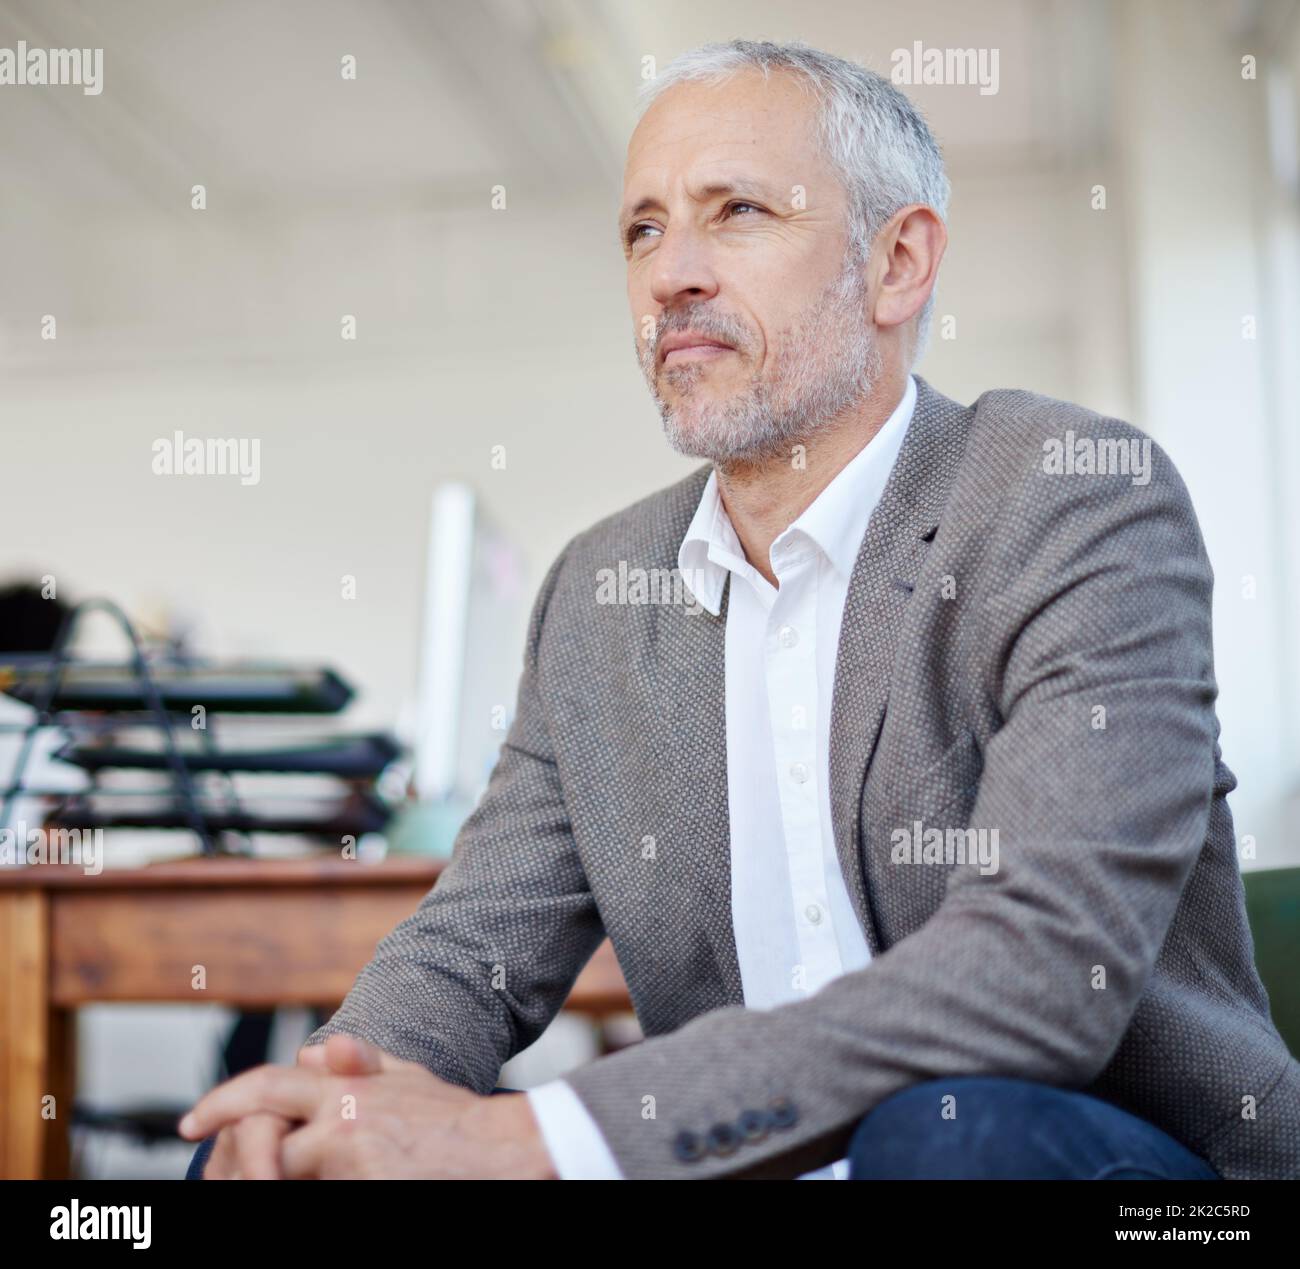 Thinking about his business future. Shot of a mature businessman sitting in an office. Stock Photo